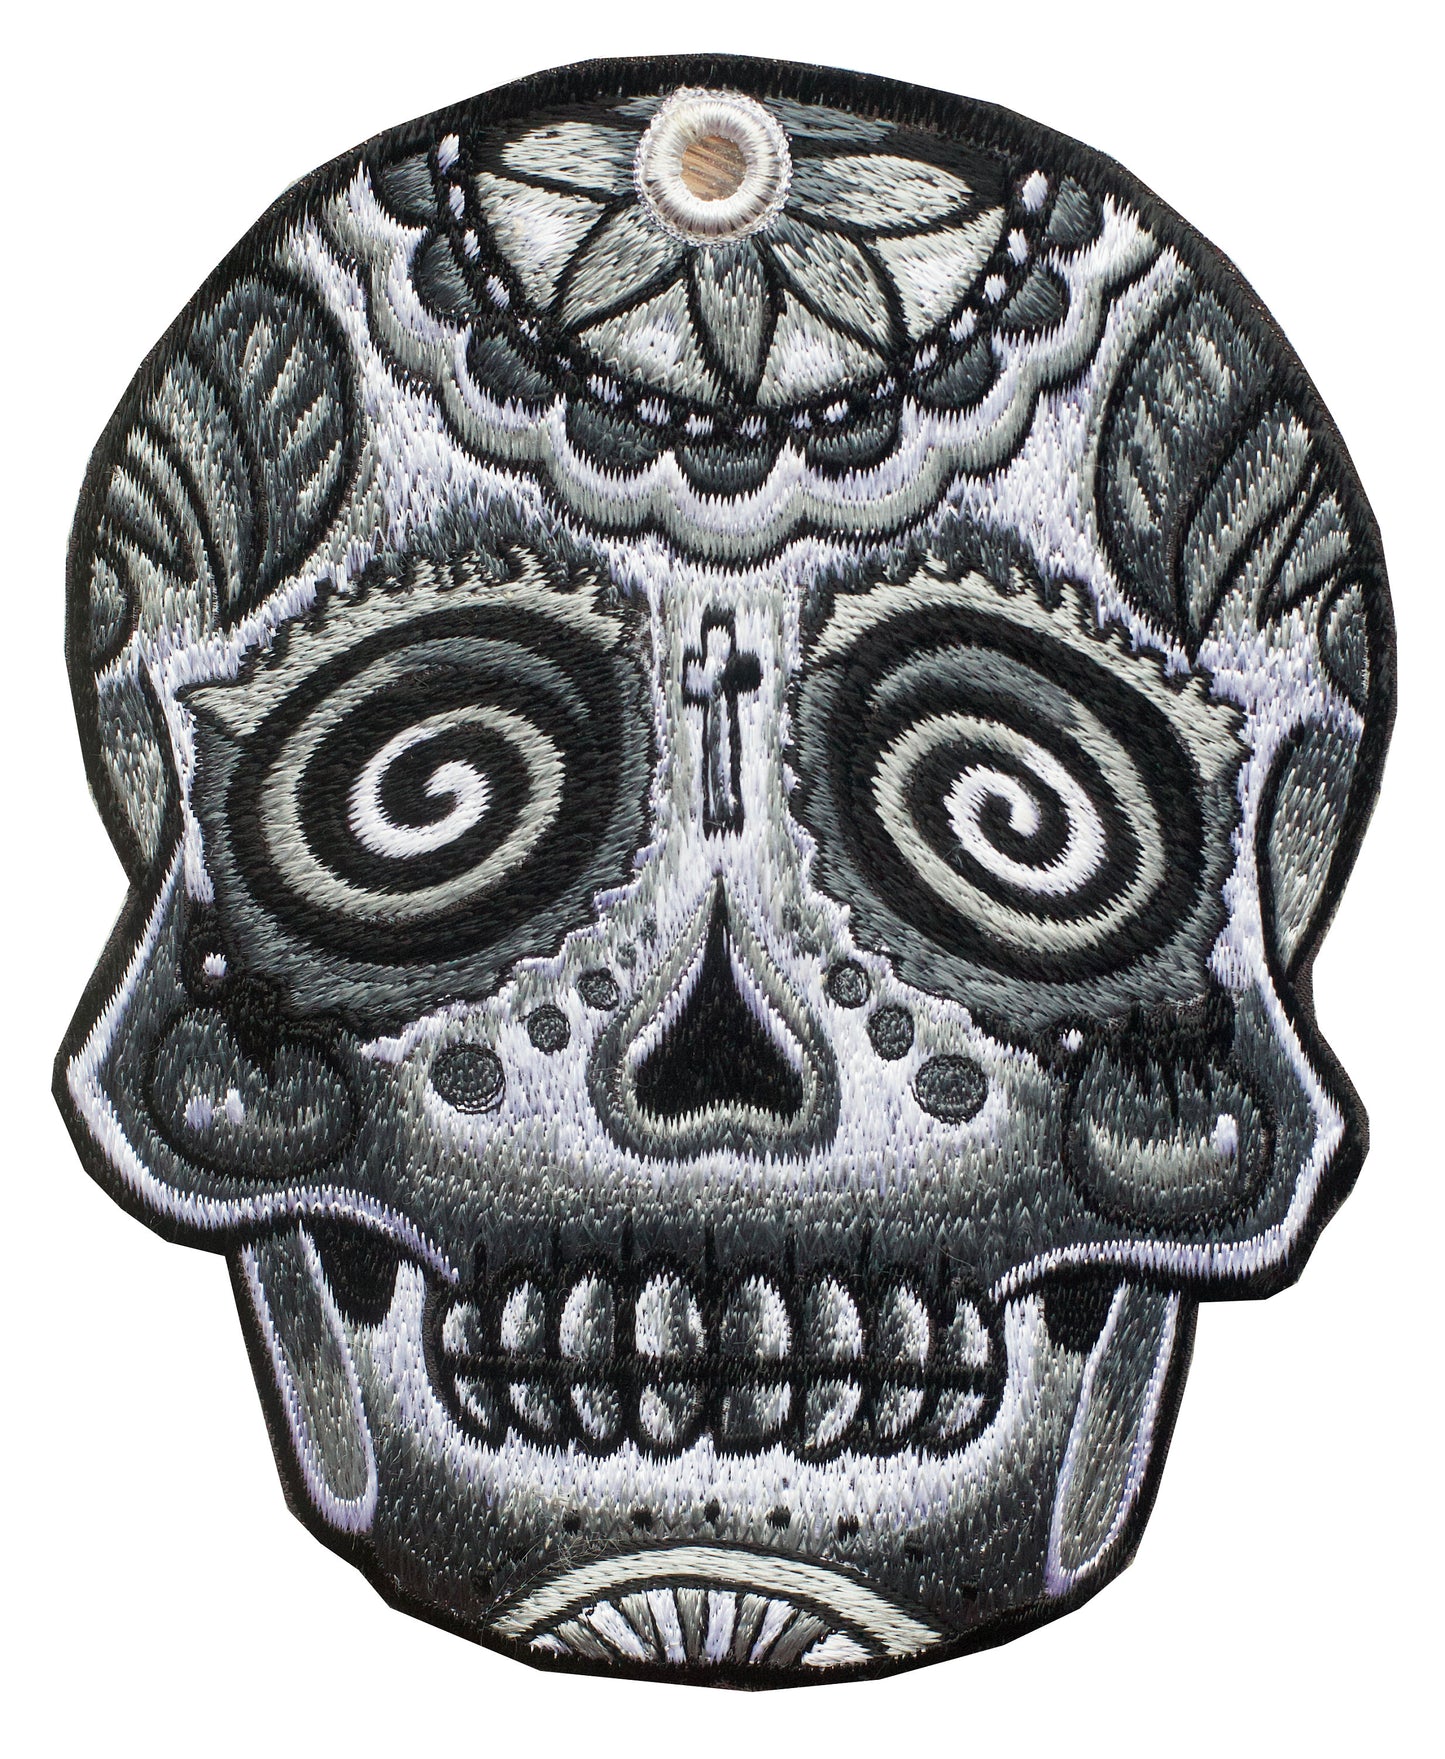 Mirror Skull gray Patch psy patch psychedelic deadhead artwork black and white embroidery